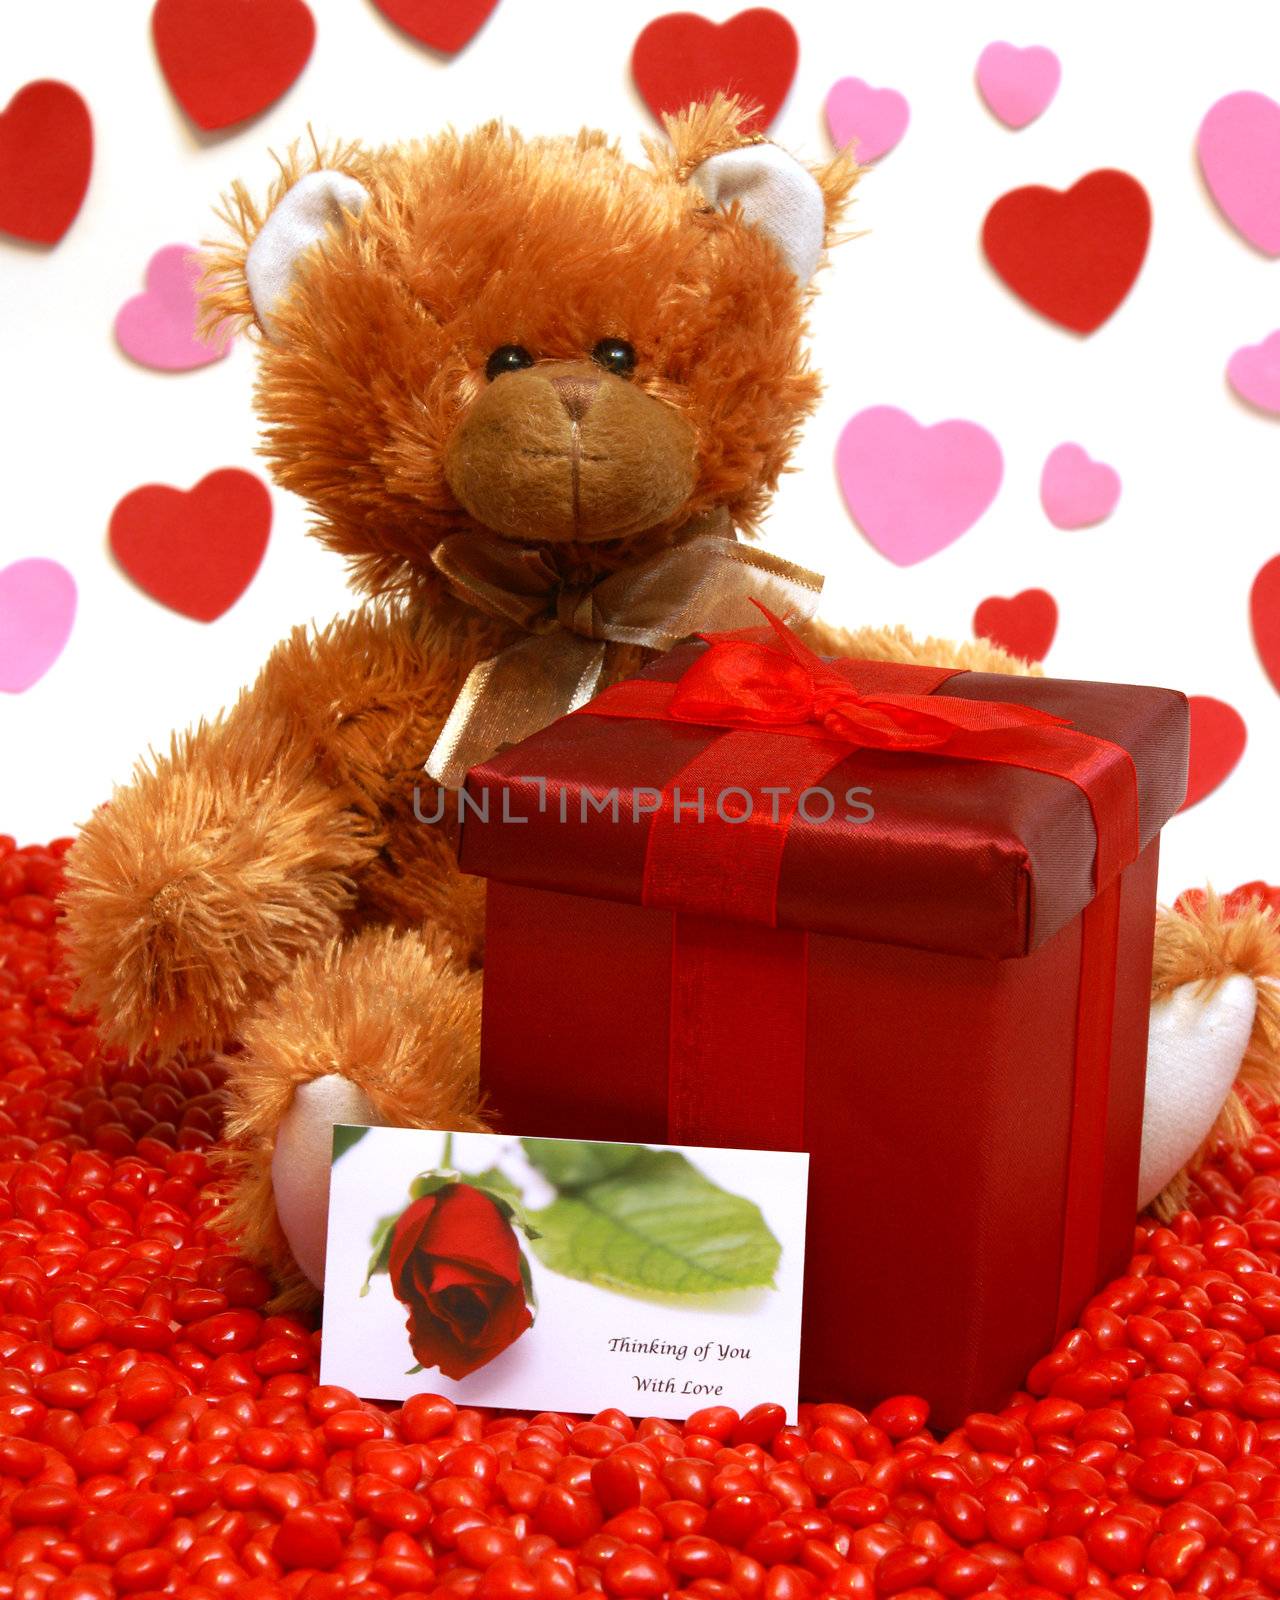 A red gift box and teddy bear to send to someone with love.